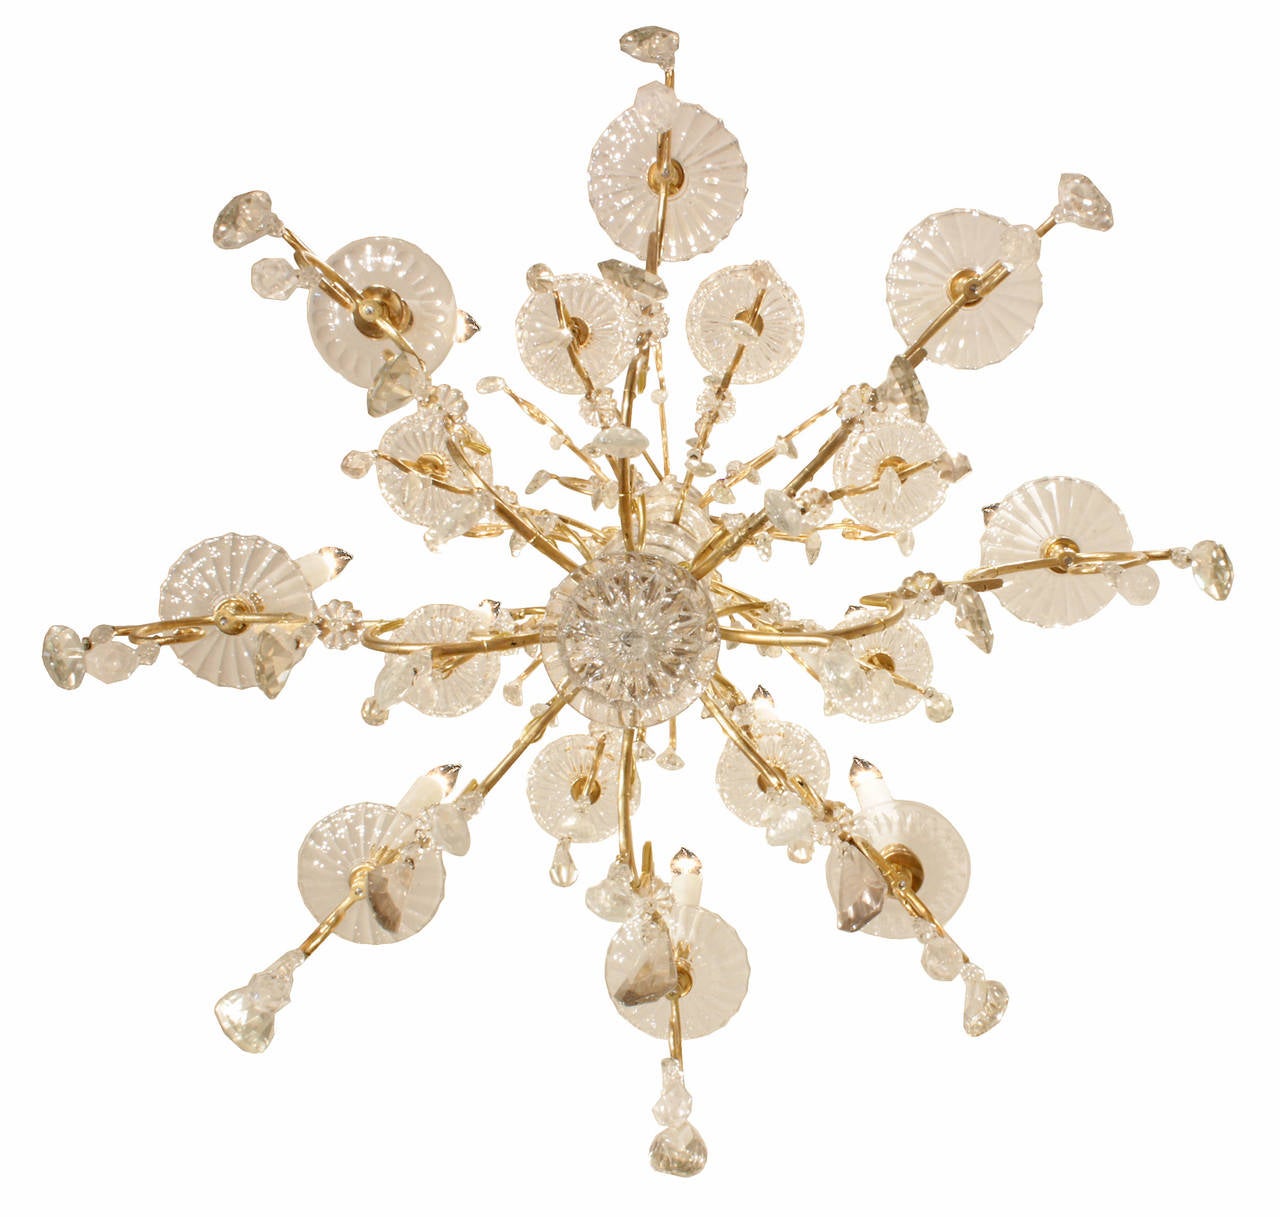 19th Century French 19th century Louis XVI Style Baccarat and Rock Crystal Chandelier